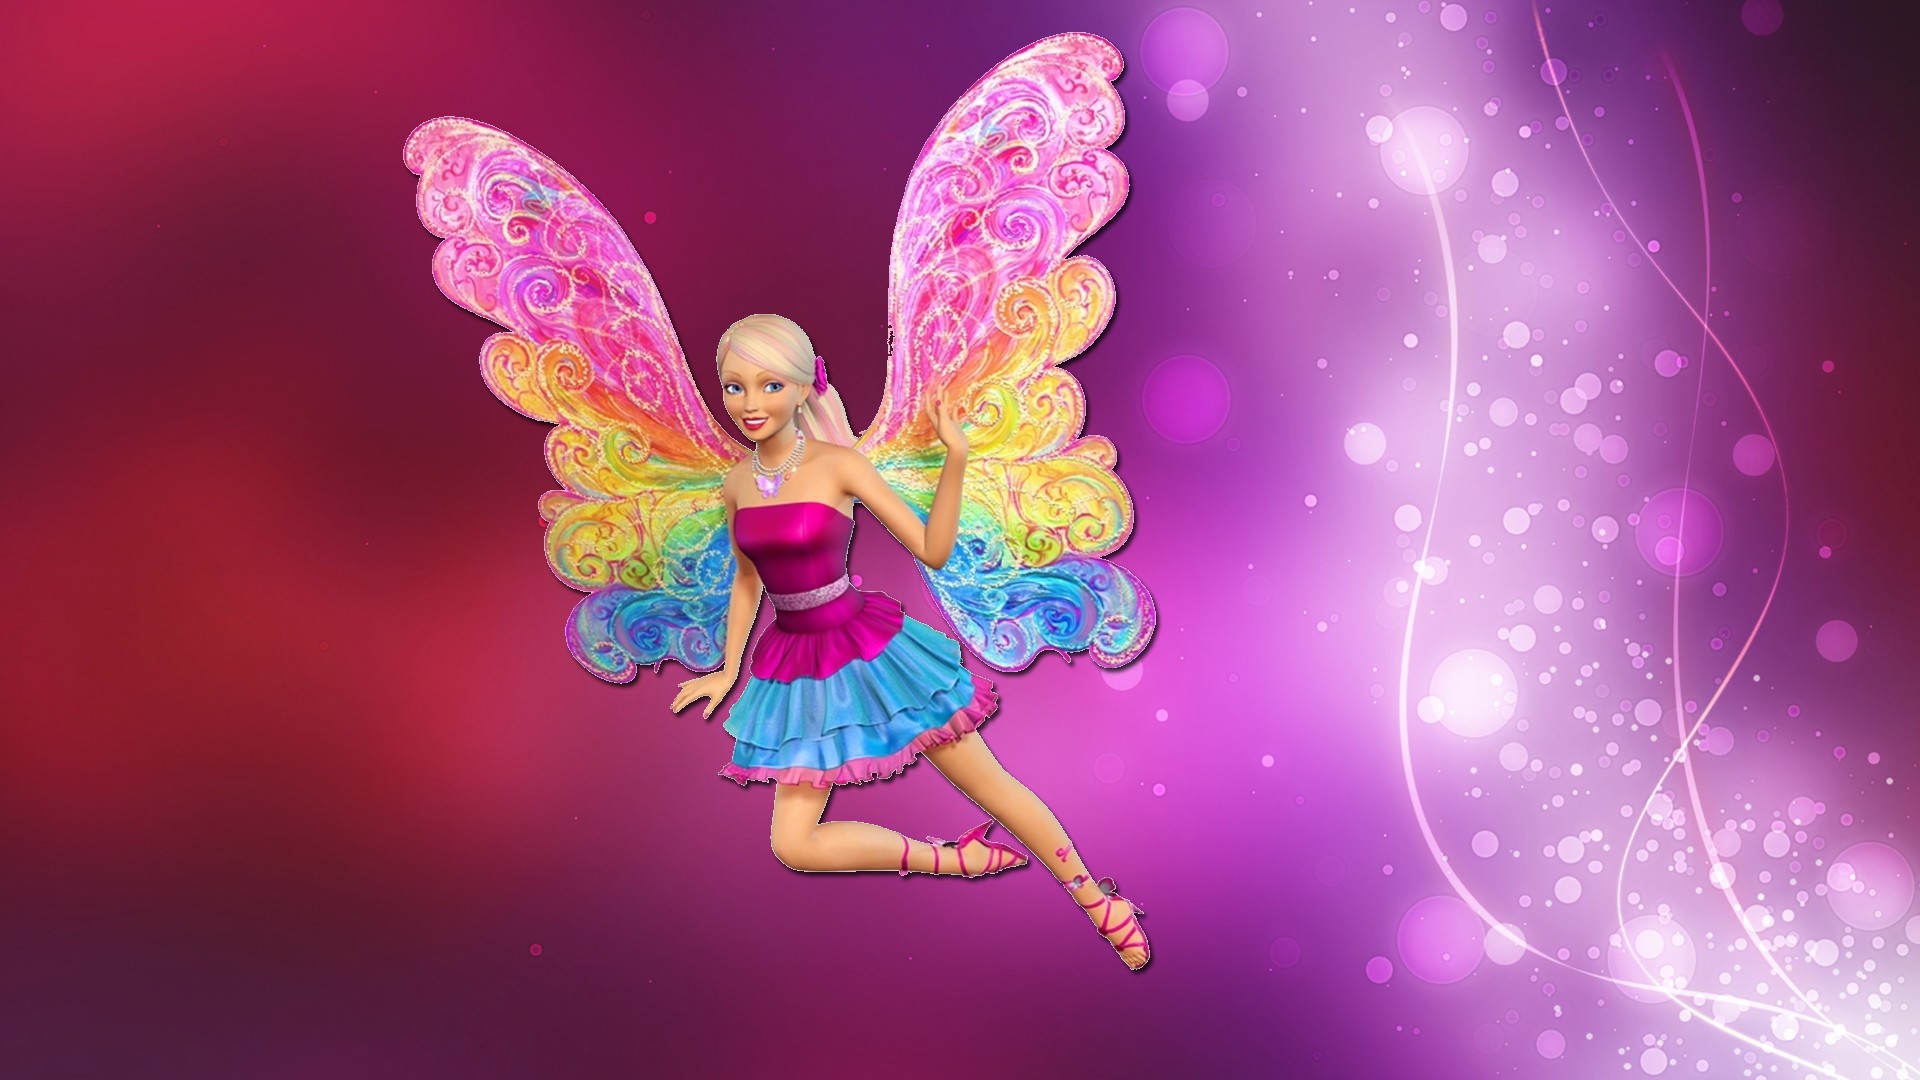 barbie wallpaper,fictional character,pink,doll,mythical creature,angel